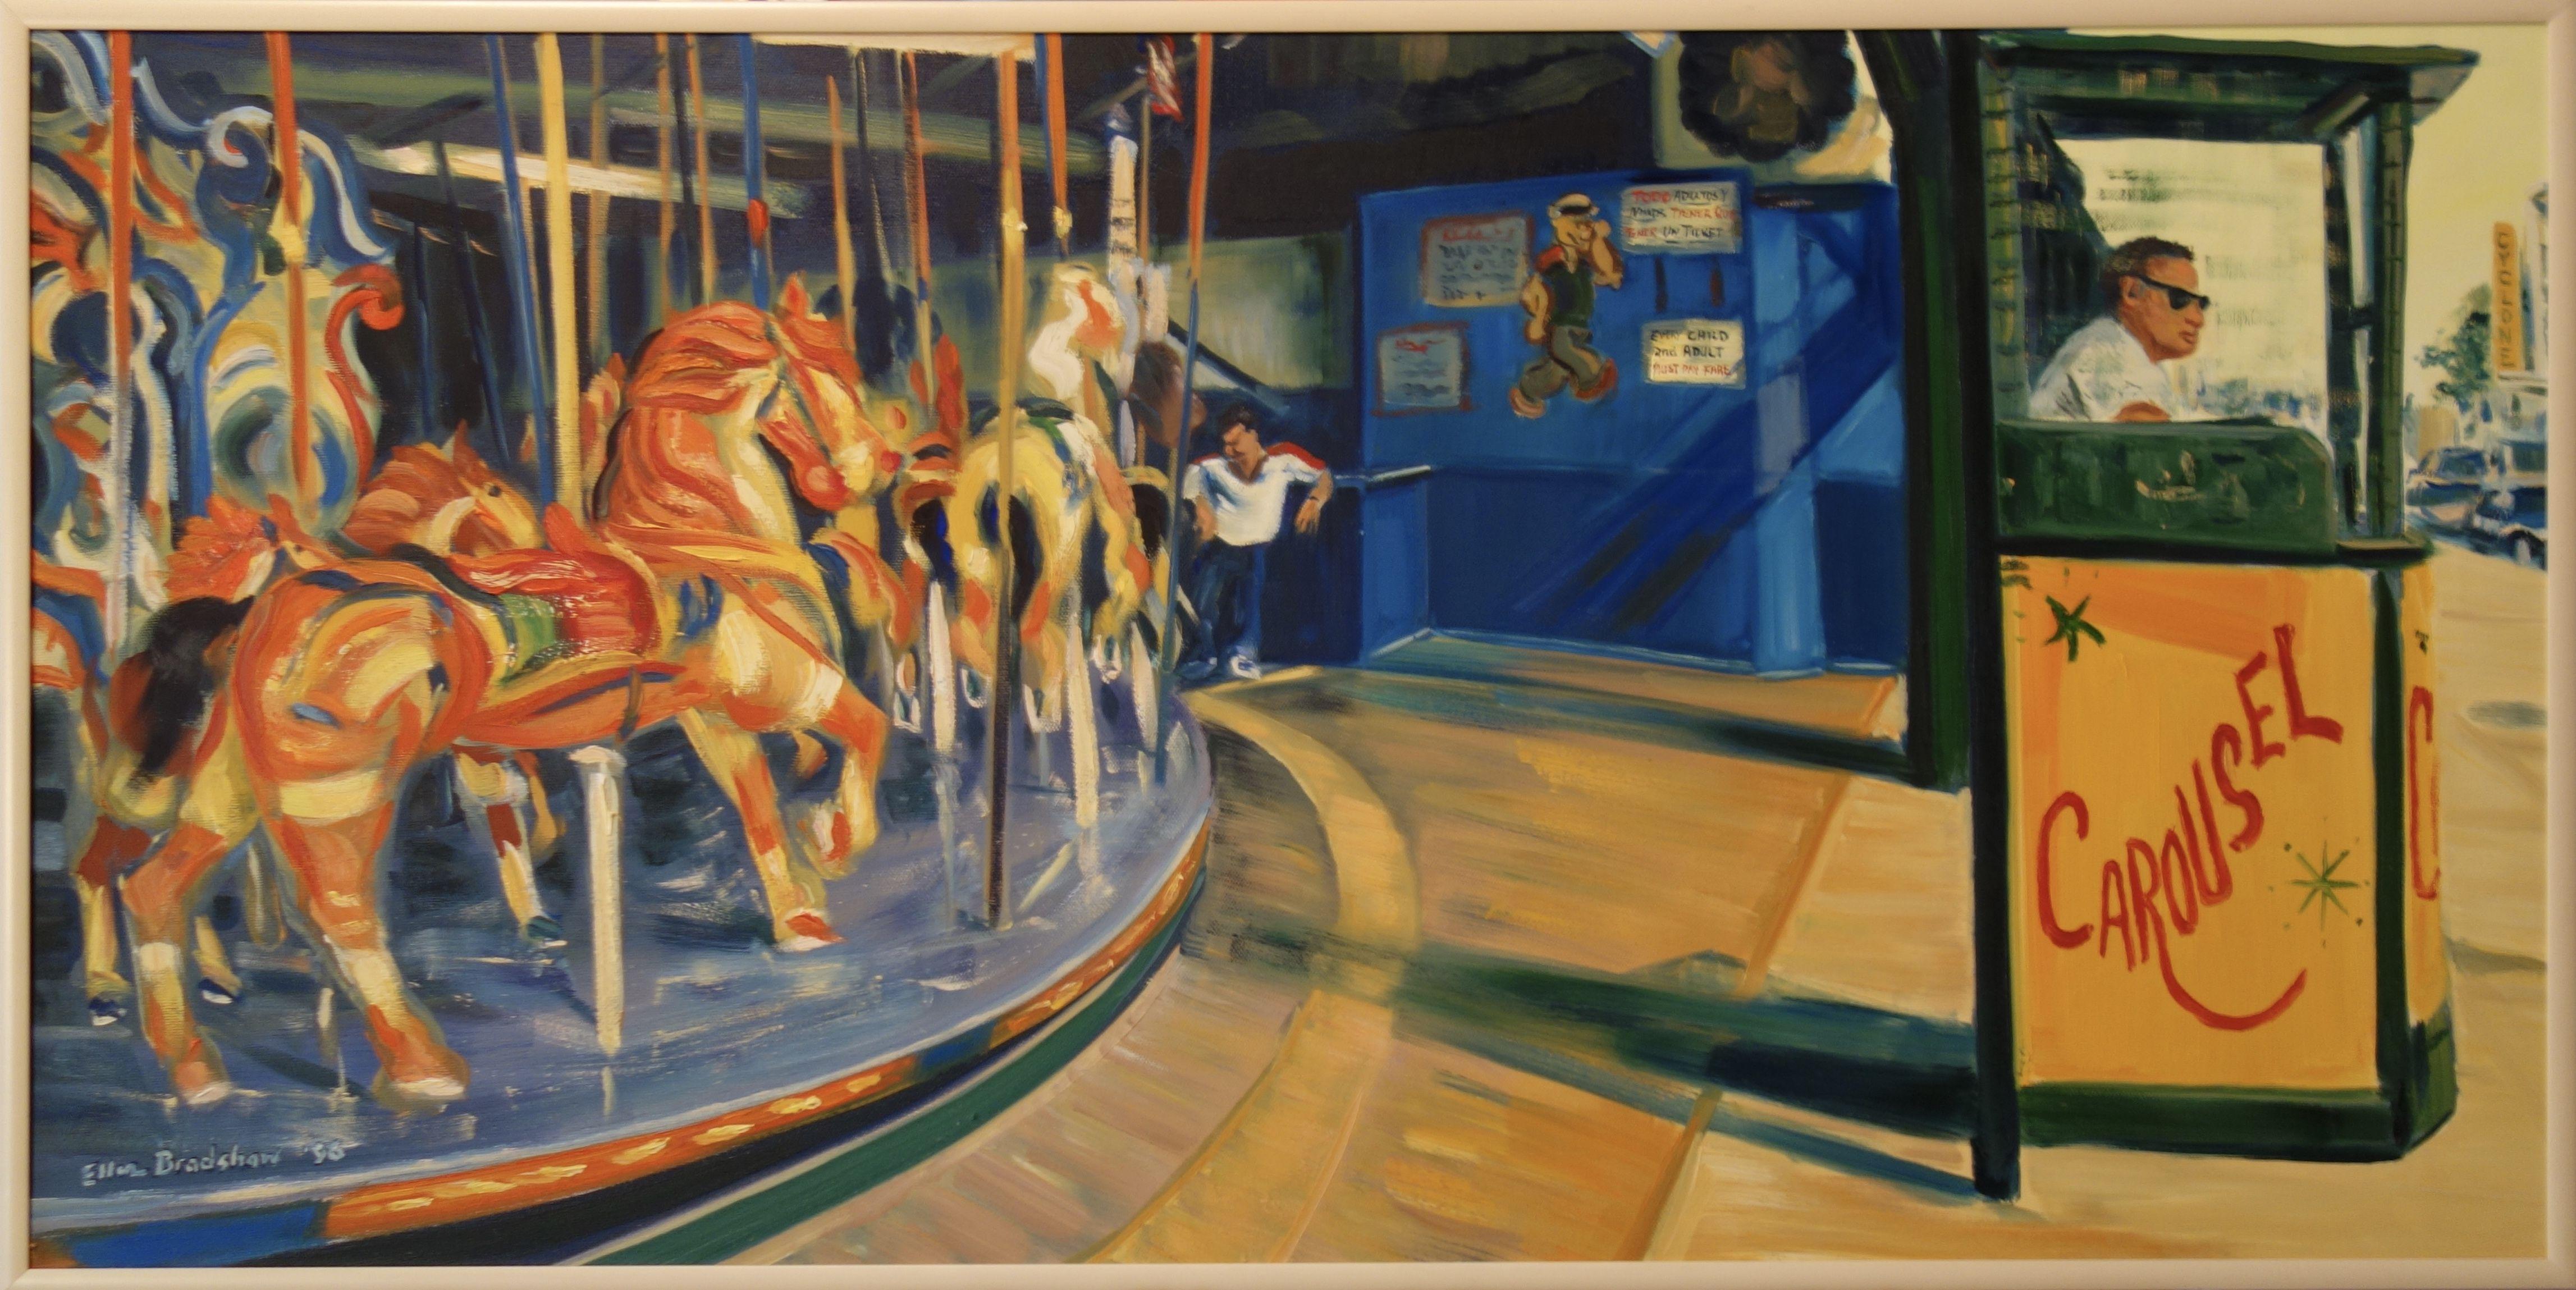 Ellen Bradshaw Abstract Painting - Carousel, Painting, Oil on Canvas